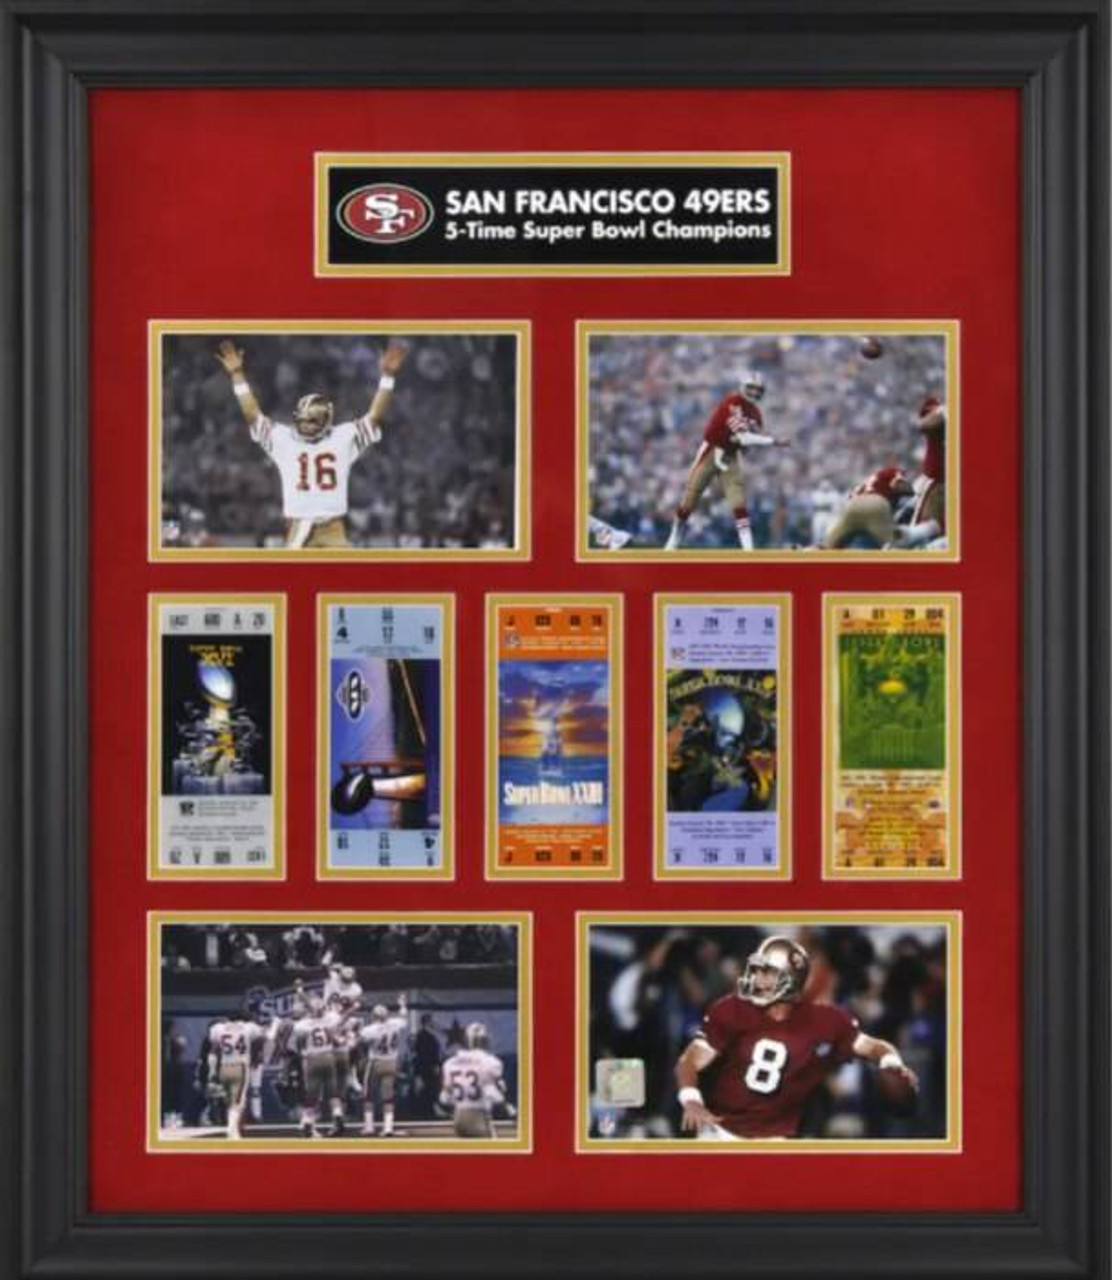 Buy San Francisco 49ers Framed Super Bowl Replica Ticket & Photograph  Collage Limited Edition